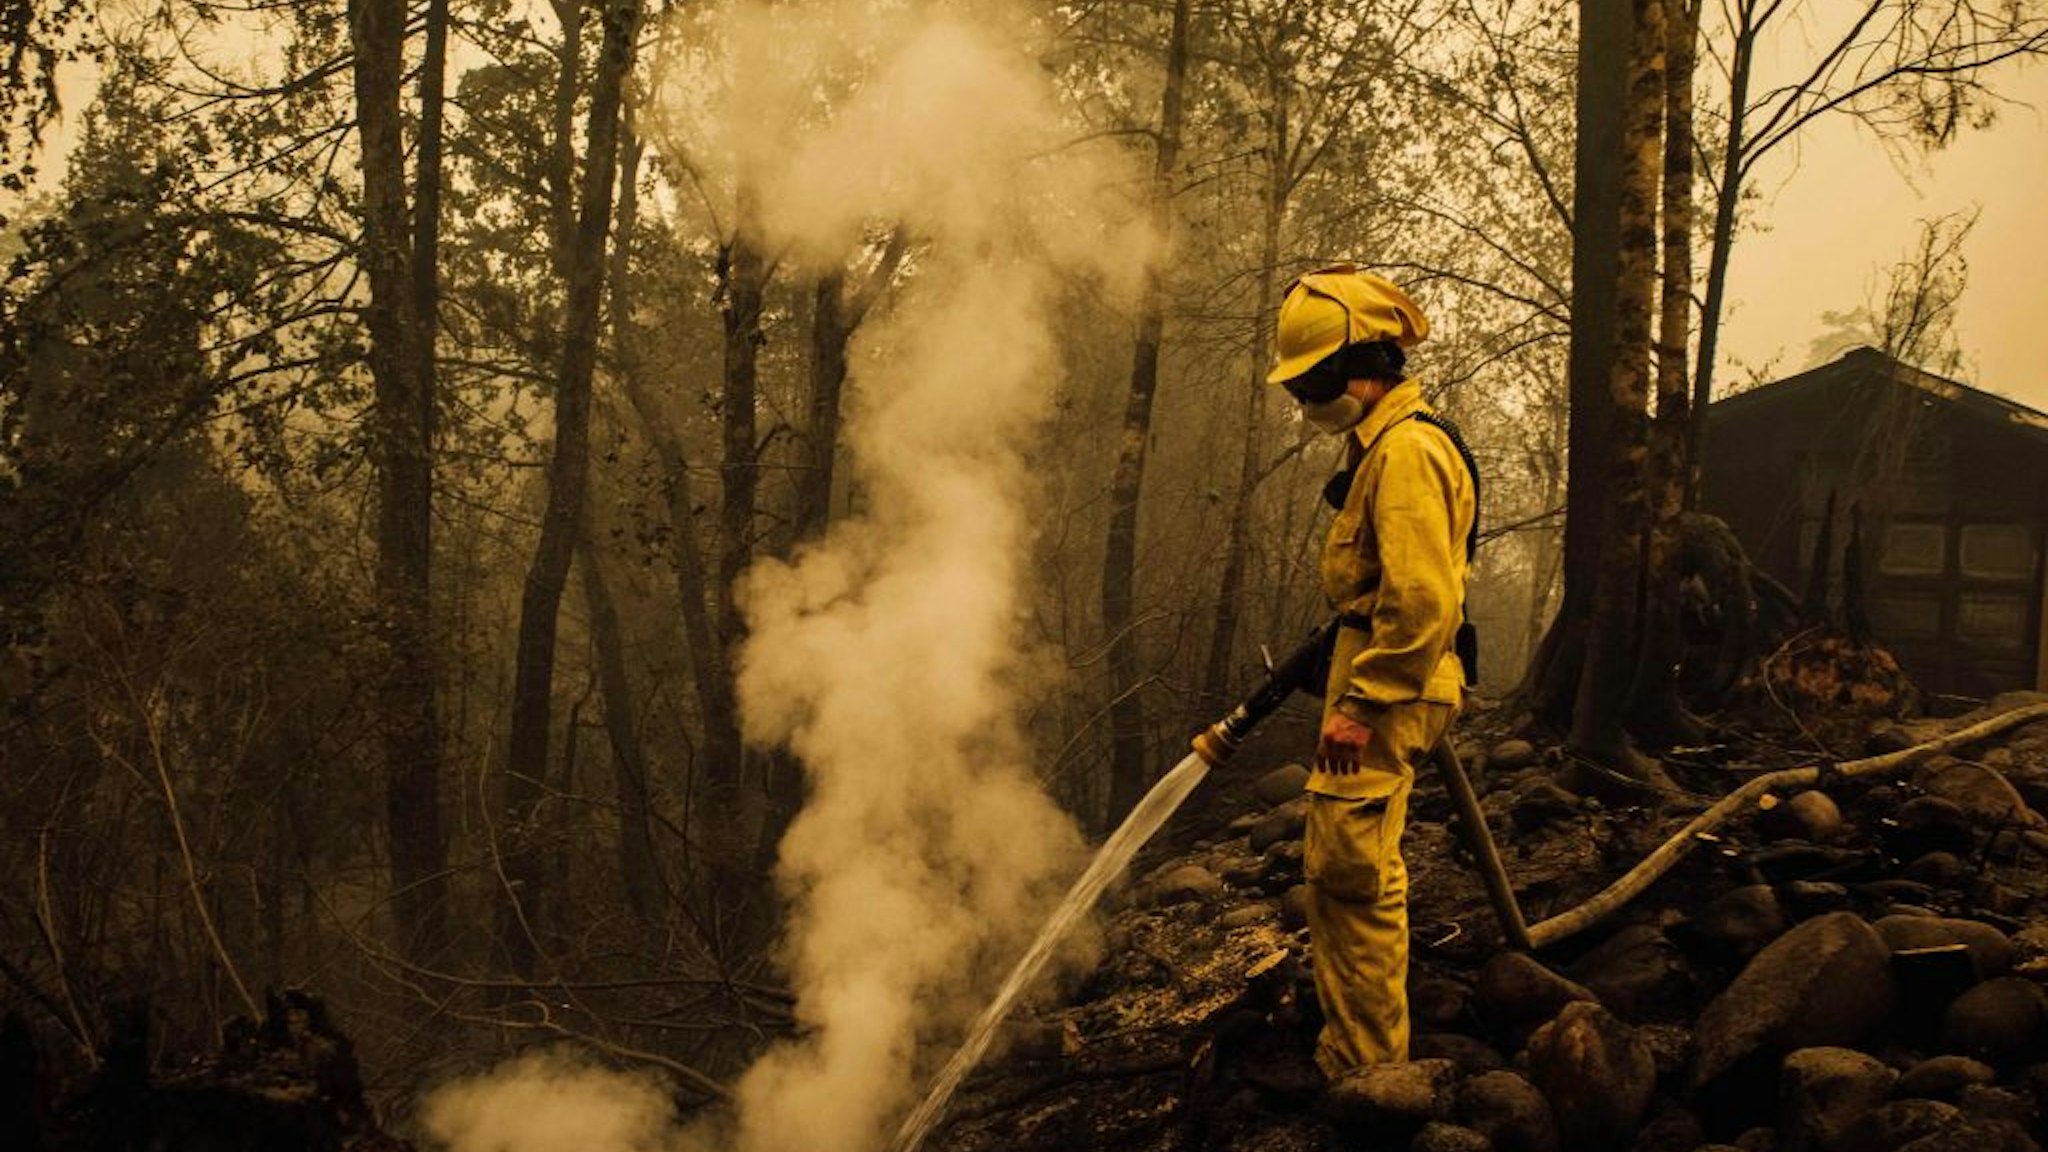 Volunteer firefighter Jacob Ruthrock puts out embers from a fire in Gates, Oregon, on September 10, 2020. - California firefighters battled the state's largest ever inferno on September 10, as tens of thousands of people fled blazes up and down the US West Coast and officials warned the death toll could shoot up in coming days. At least eight people have been confirmed dead in the past 24 hours across California, Oregon and Washington, but officials say some areas are still impossible to reach, meaning the number is likely to rise. (Photo by Kathryn ELSESSER / AFP) (Photo by KATHRYN ELSESSER/AFP via Getty Images)